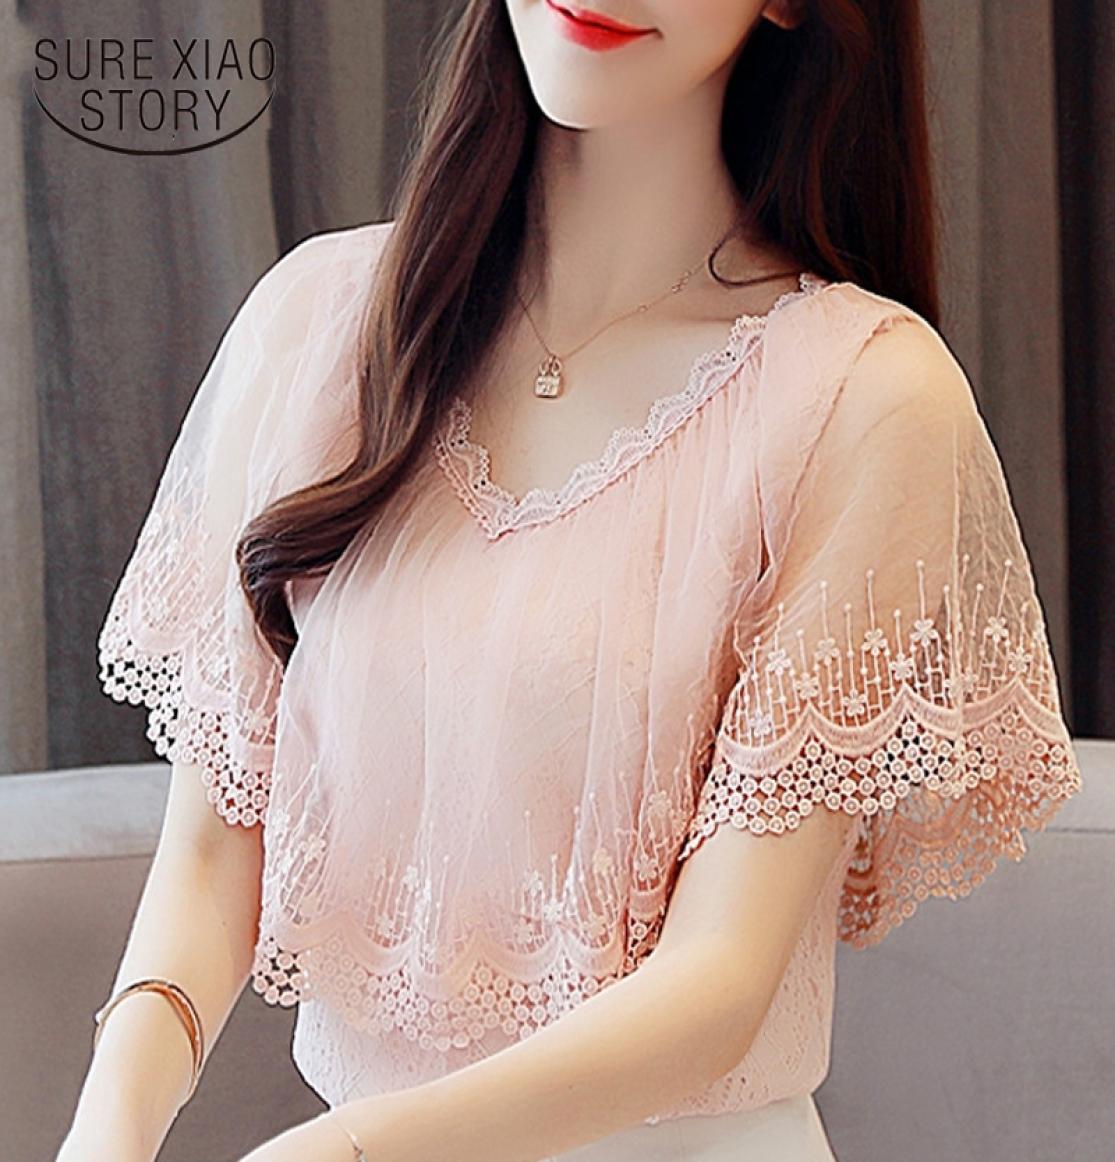 

Women Tops And Blouses Summer Lace Blouse Shirt Fashion Women Blouses New 2018 Short Sleeve Lace Top Blusa Feminina 0788 30 Y190515596778, Pink